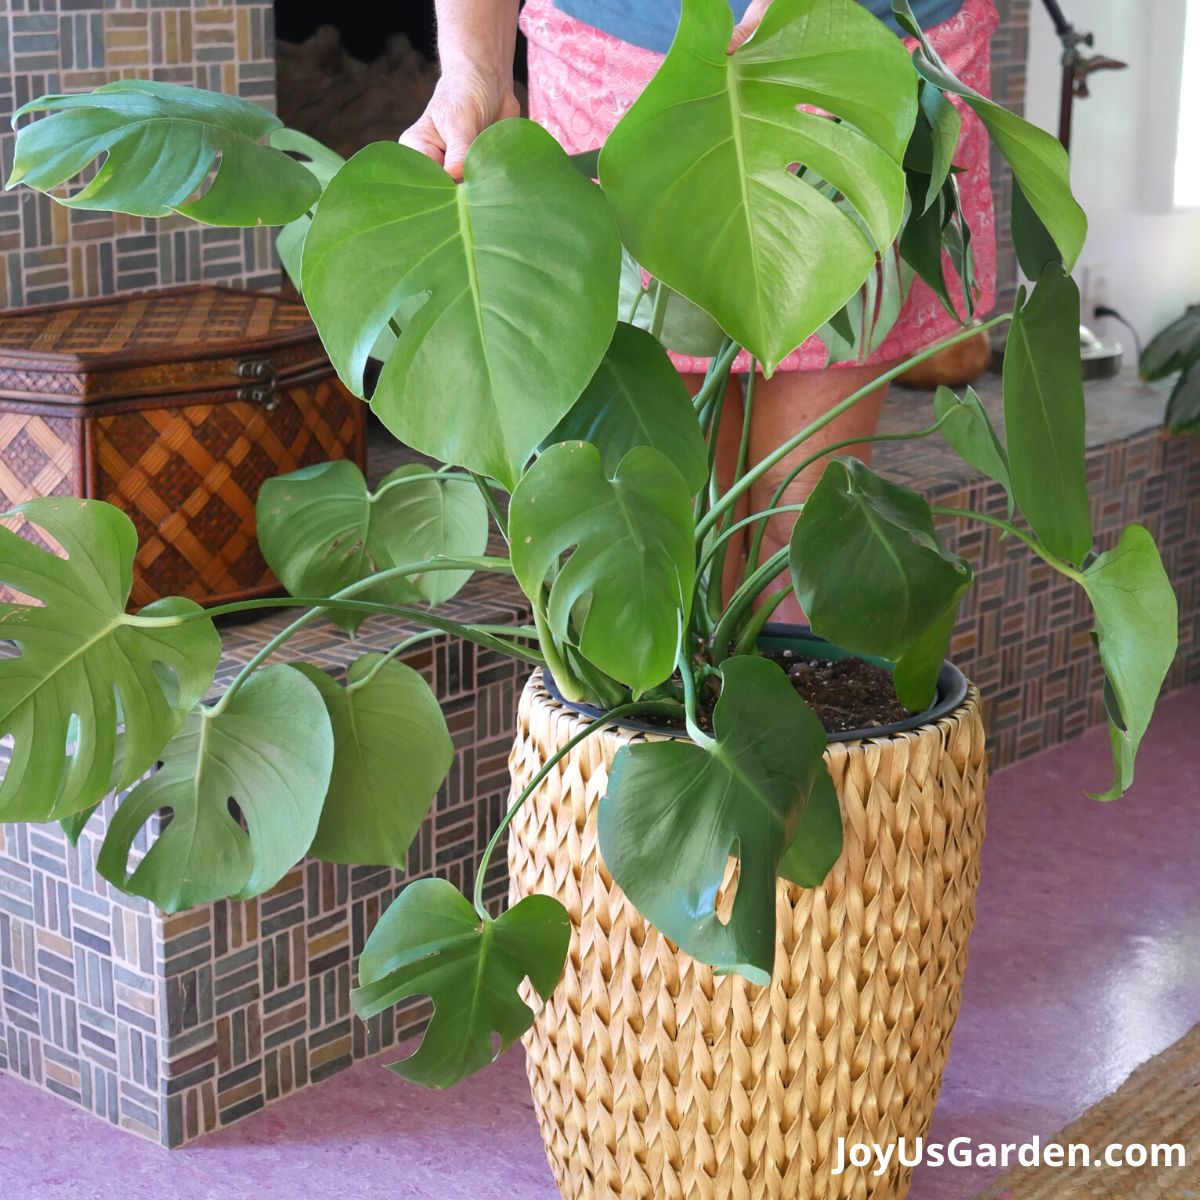 nell foster standing next to monstera deliciosa large size plant growing indoors in plant basket